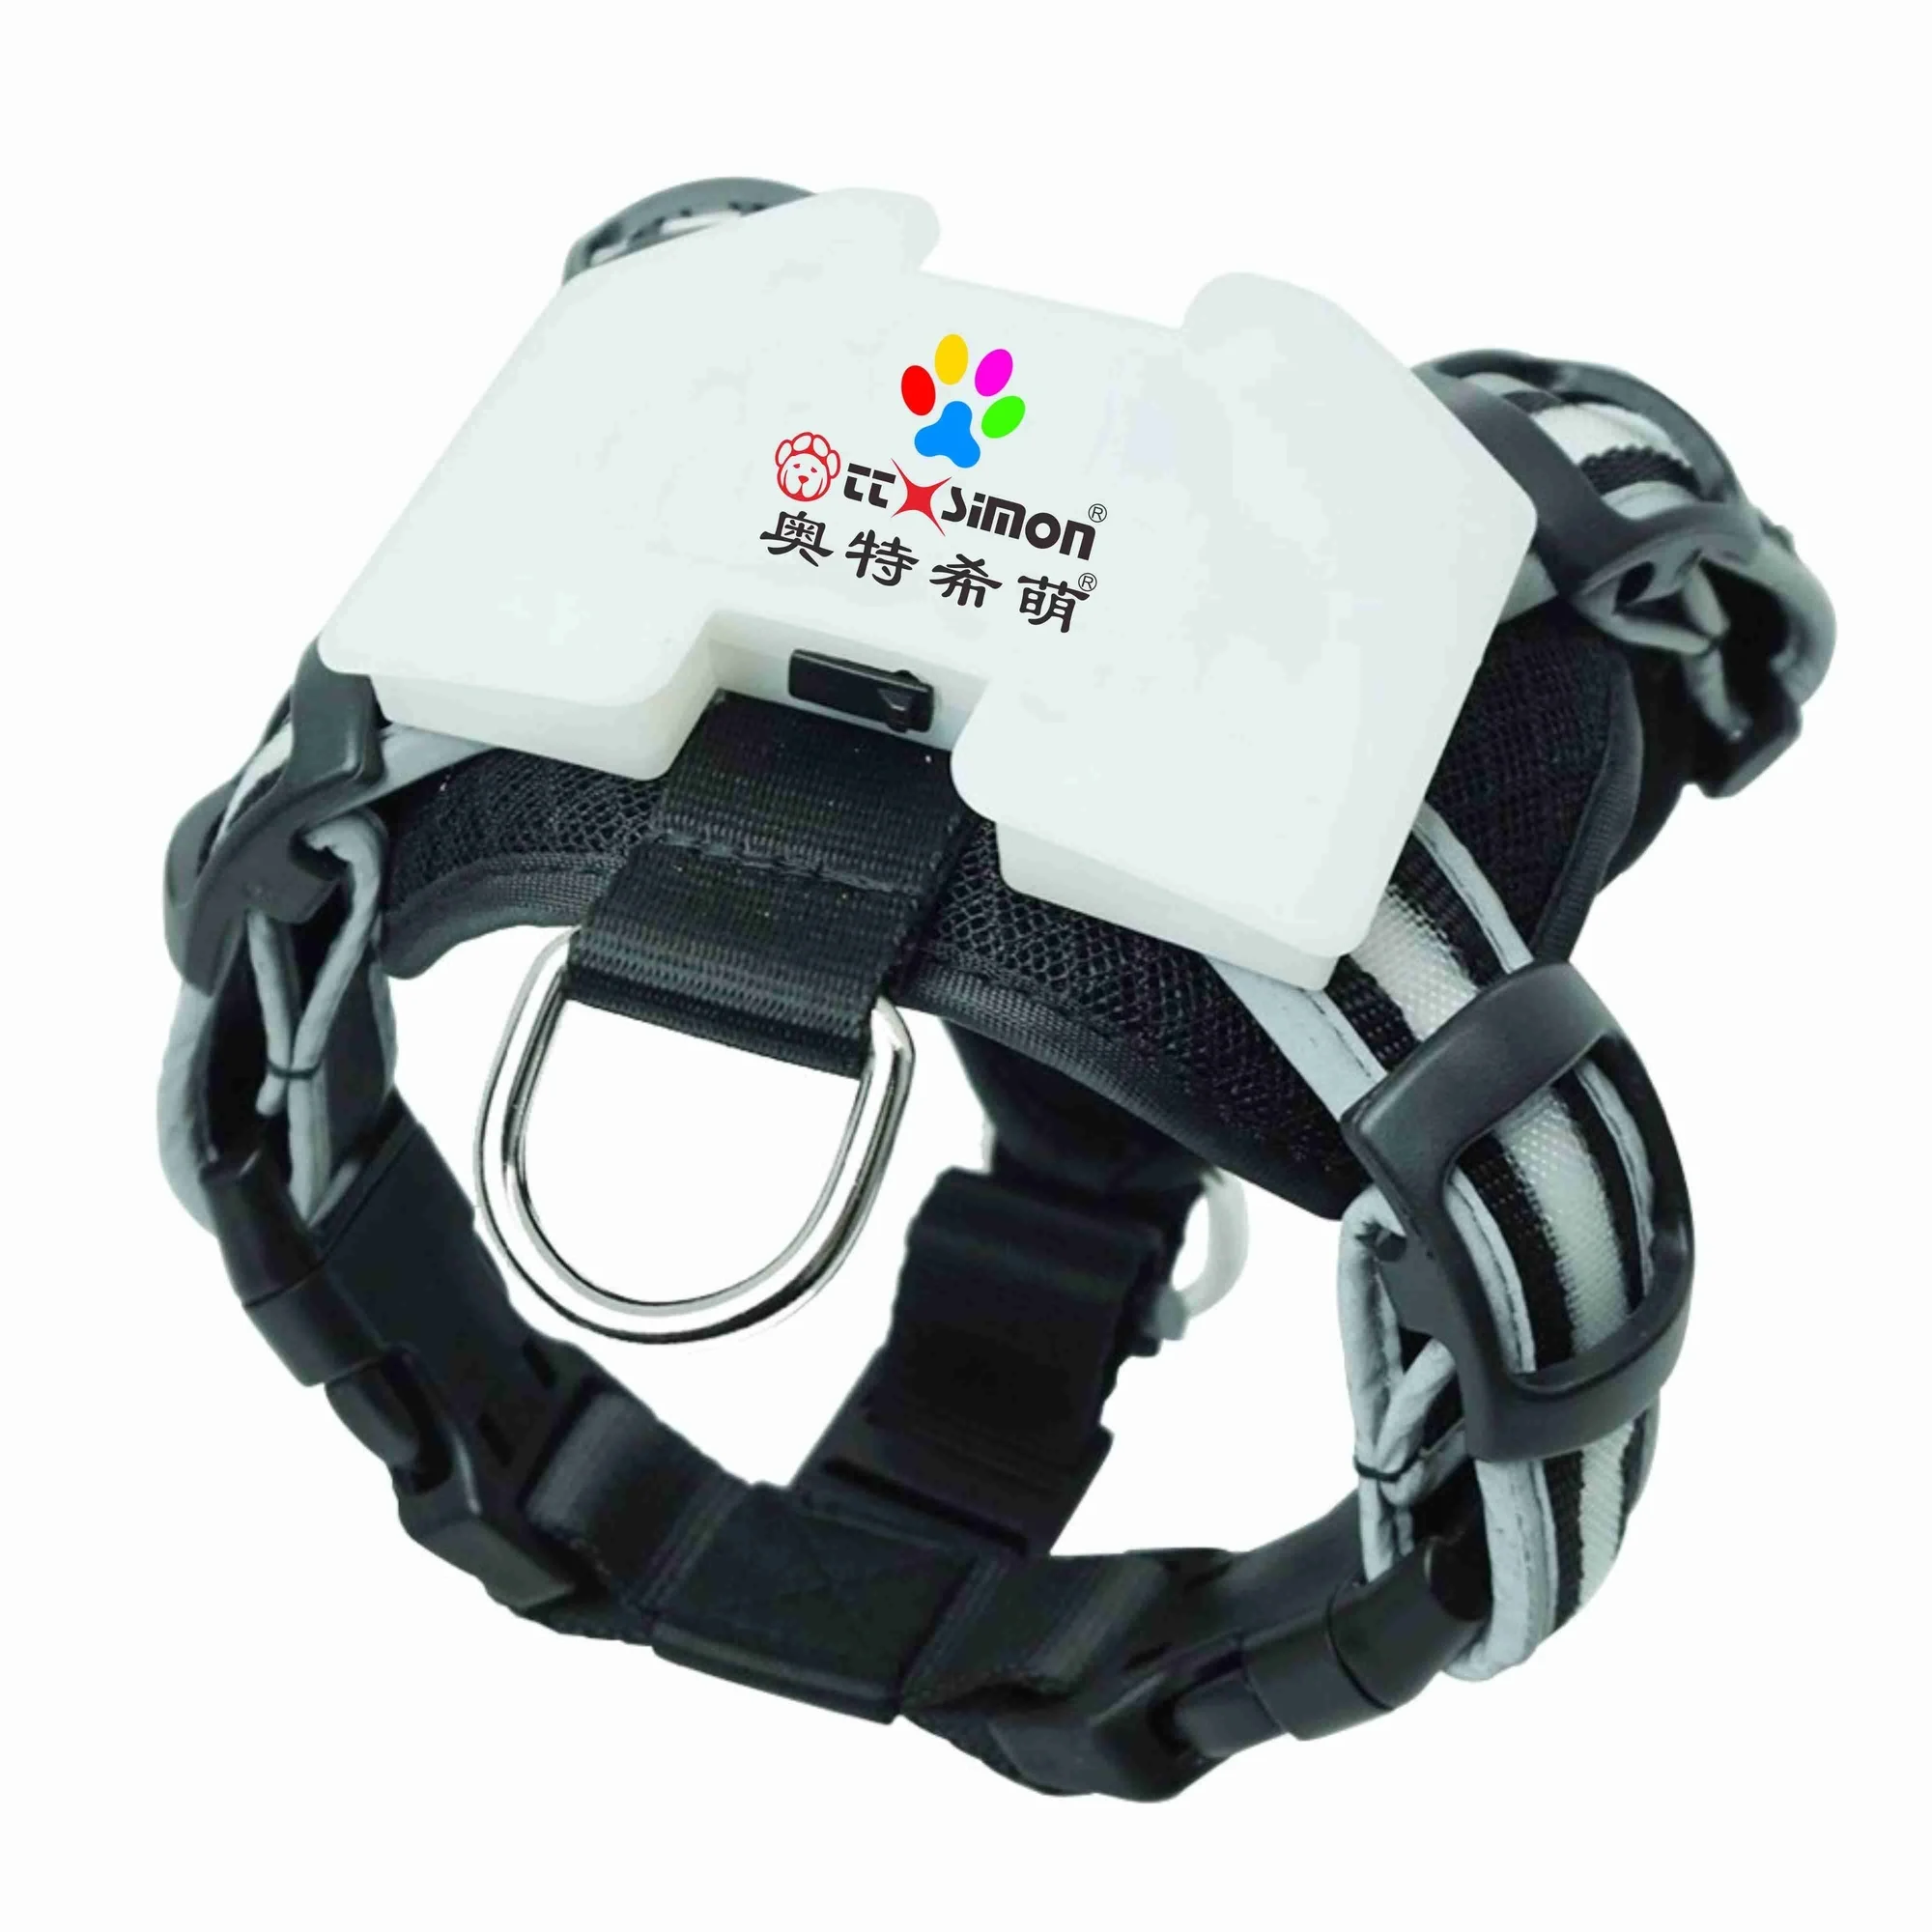 

Large for Simon Oem Dog with Private Label Dog Harness Reflective Lights Personalized Nylon Quick Release Padded Cc All Seasons